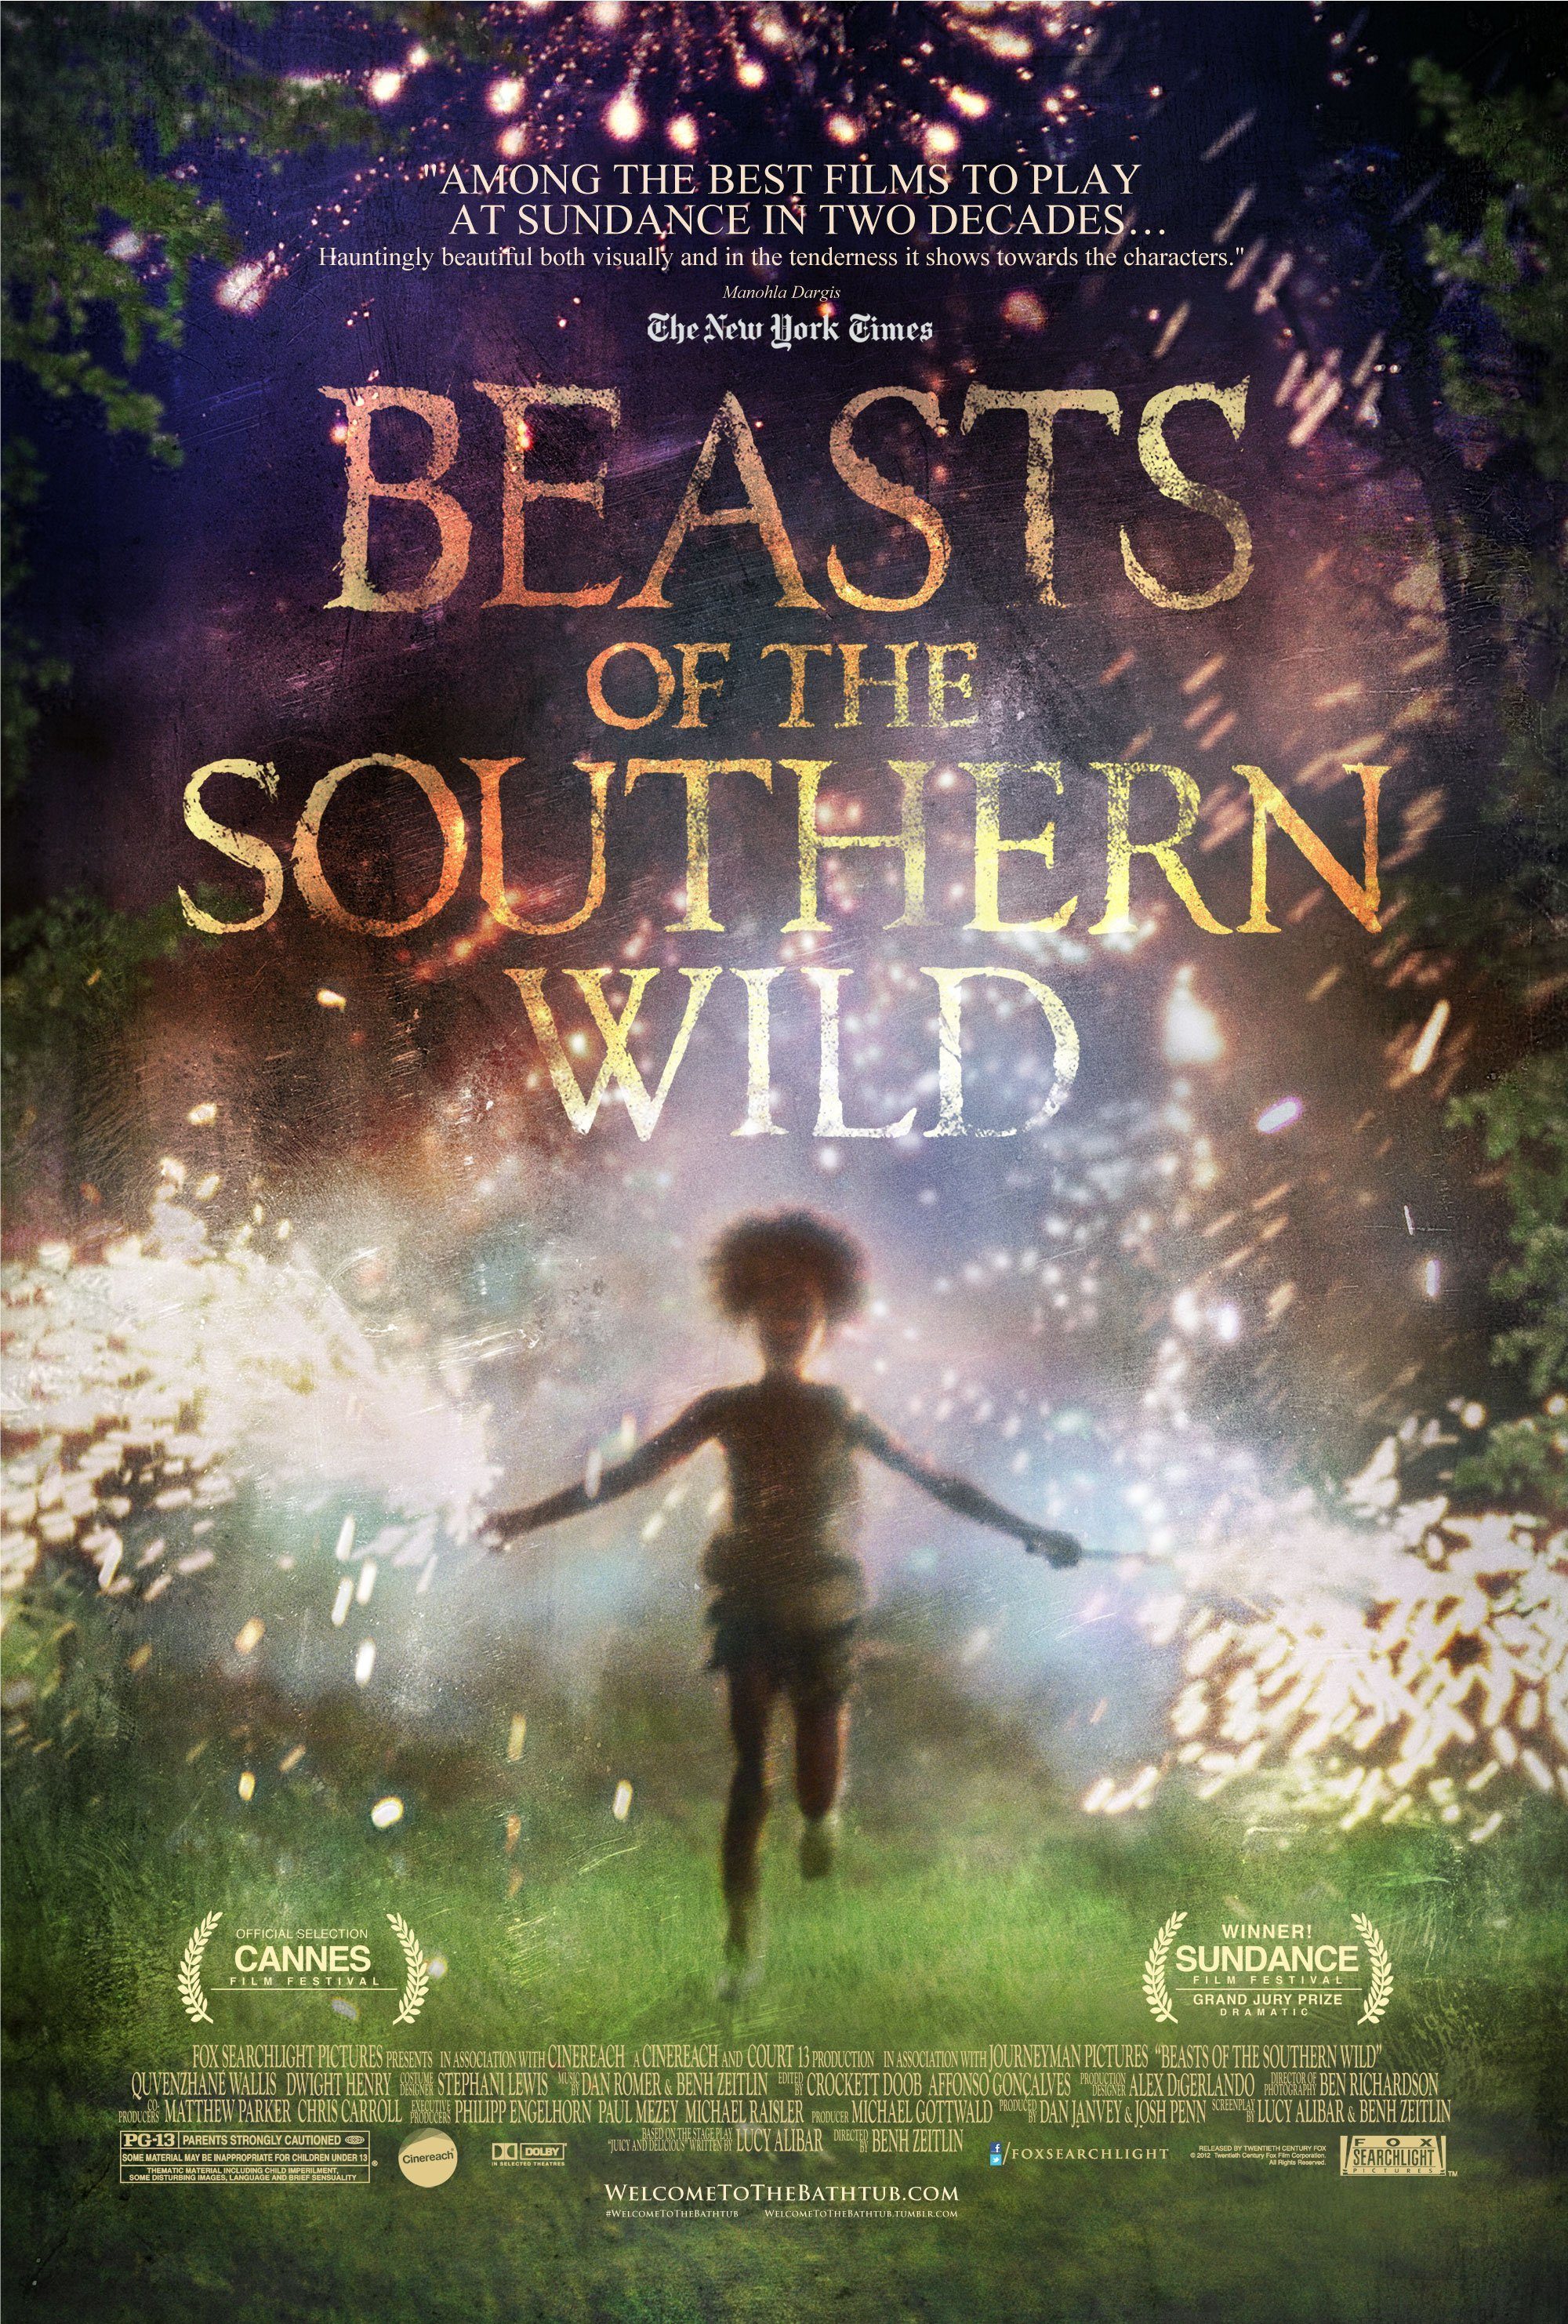 Beasts of the Southern Wild - life changing inspirational movie